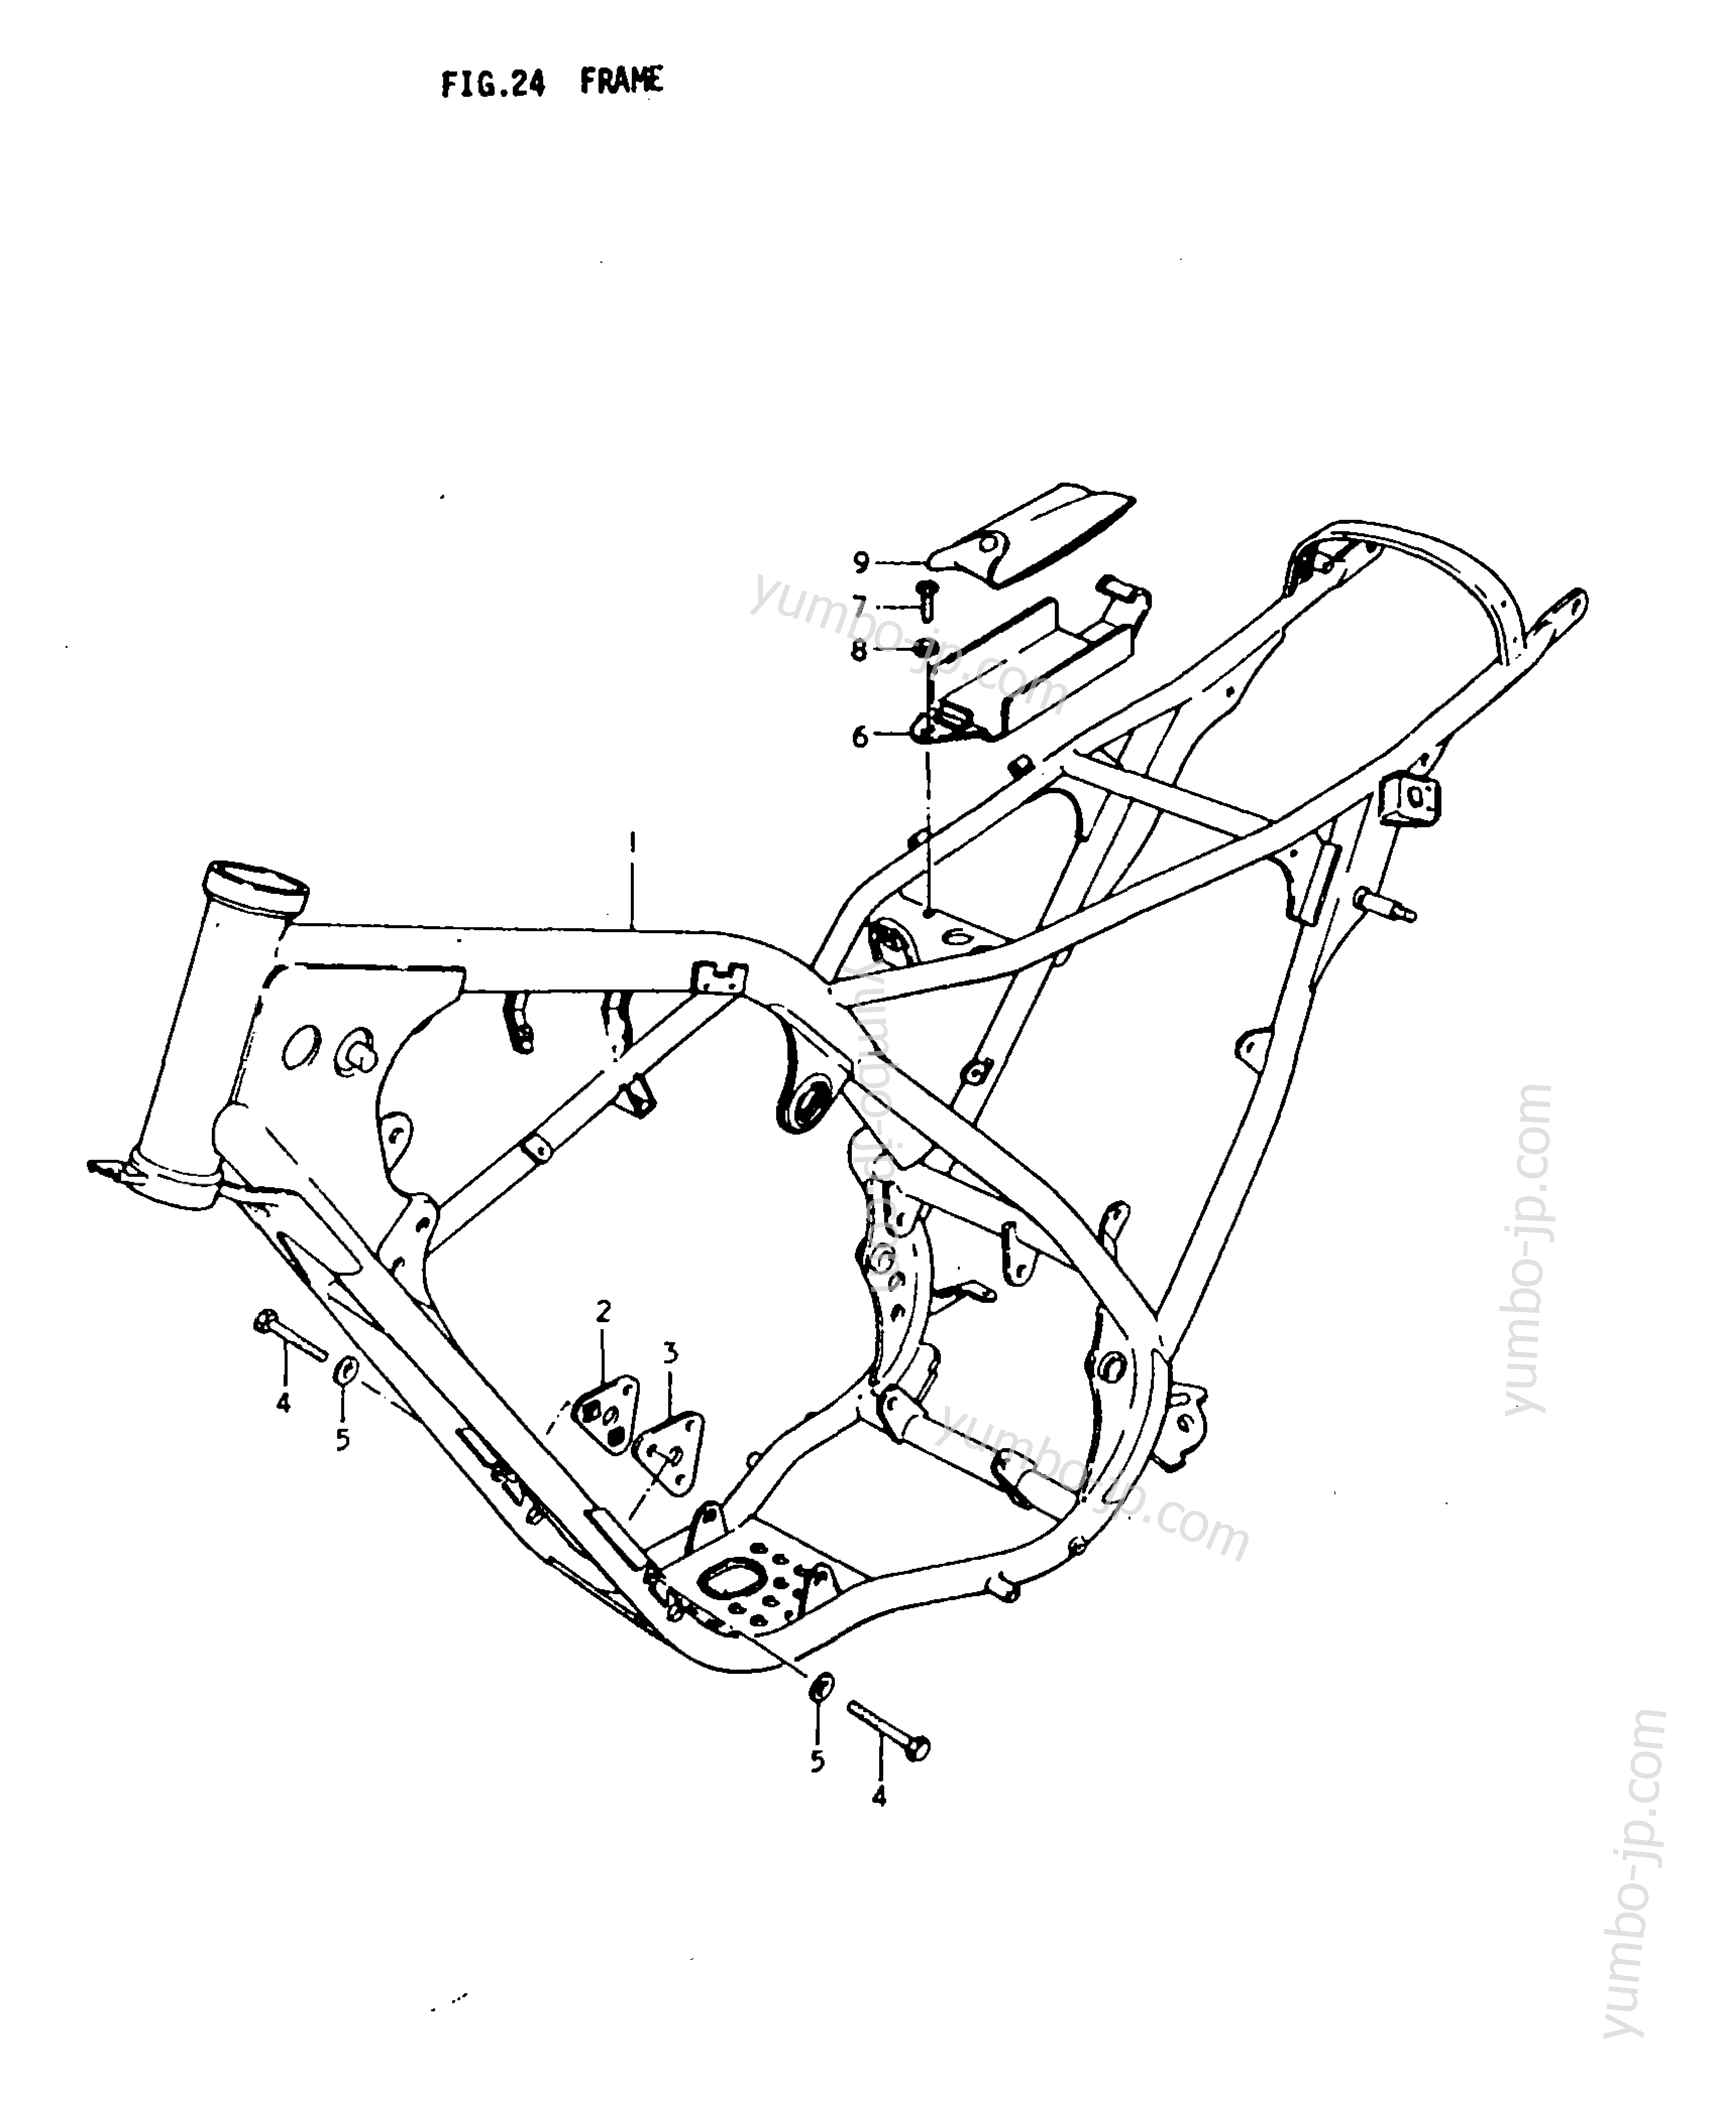 FRAME for motorcycles SUZUKI TS250 1978 year